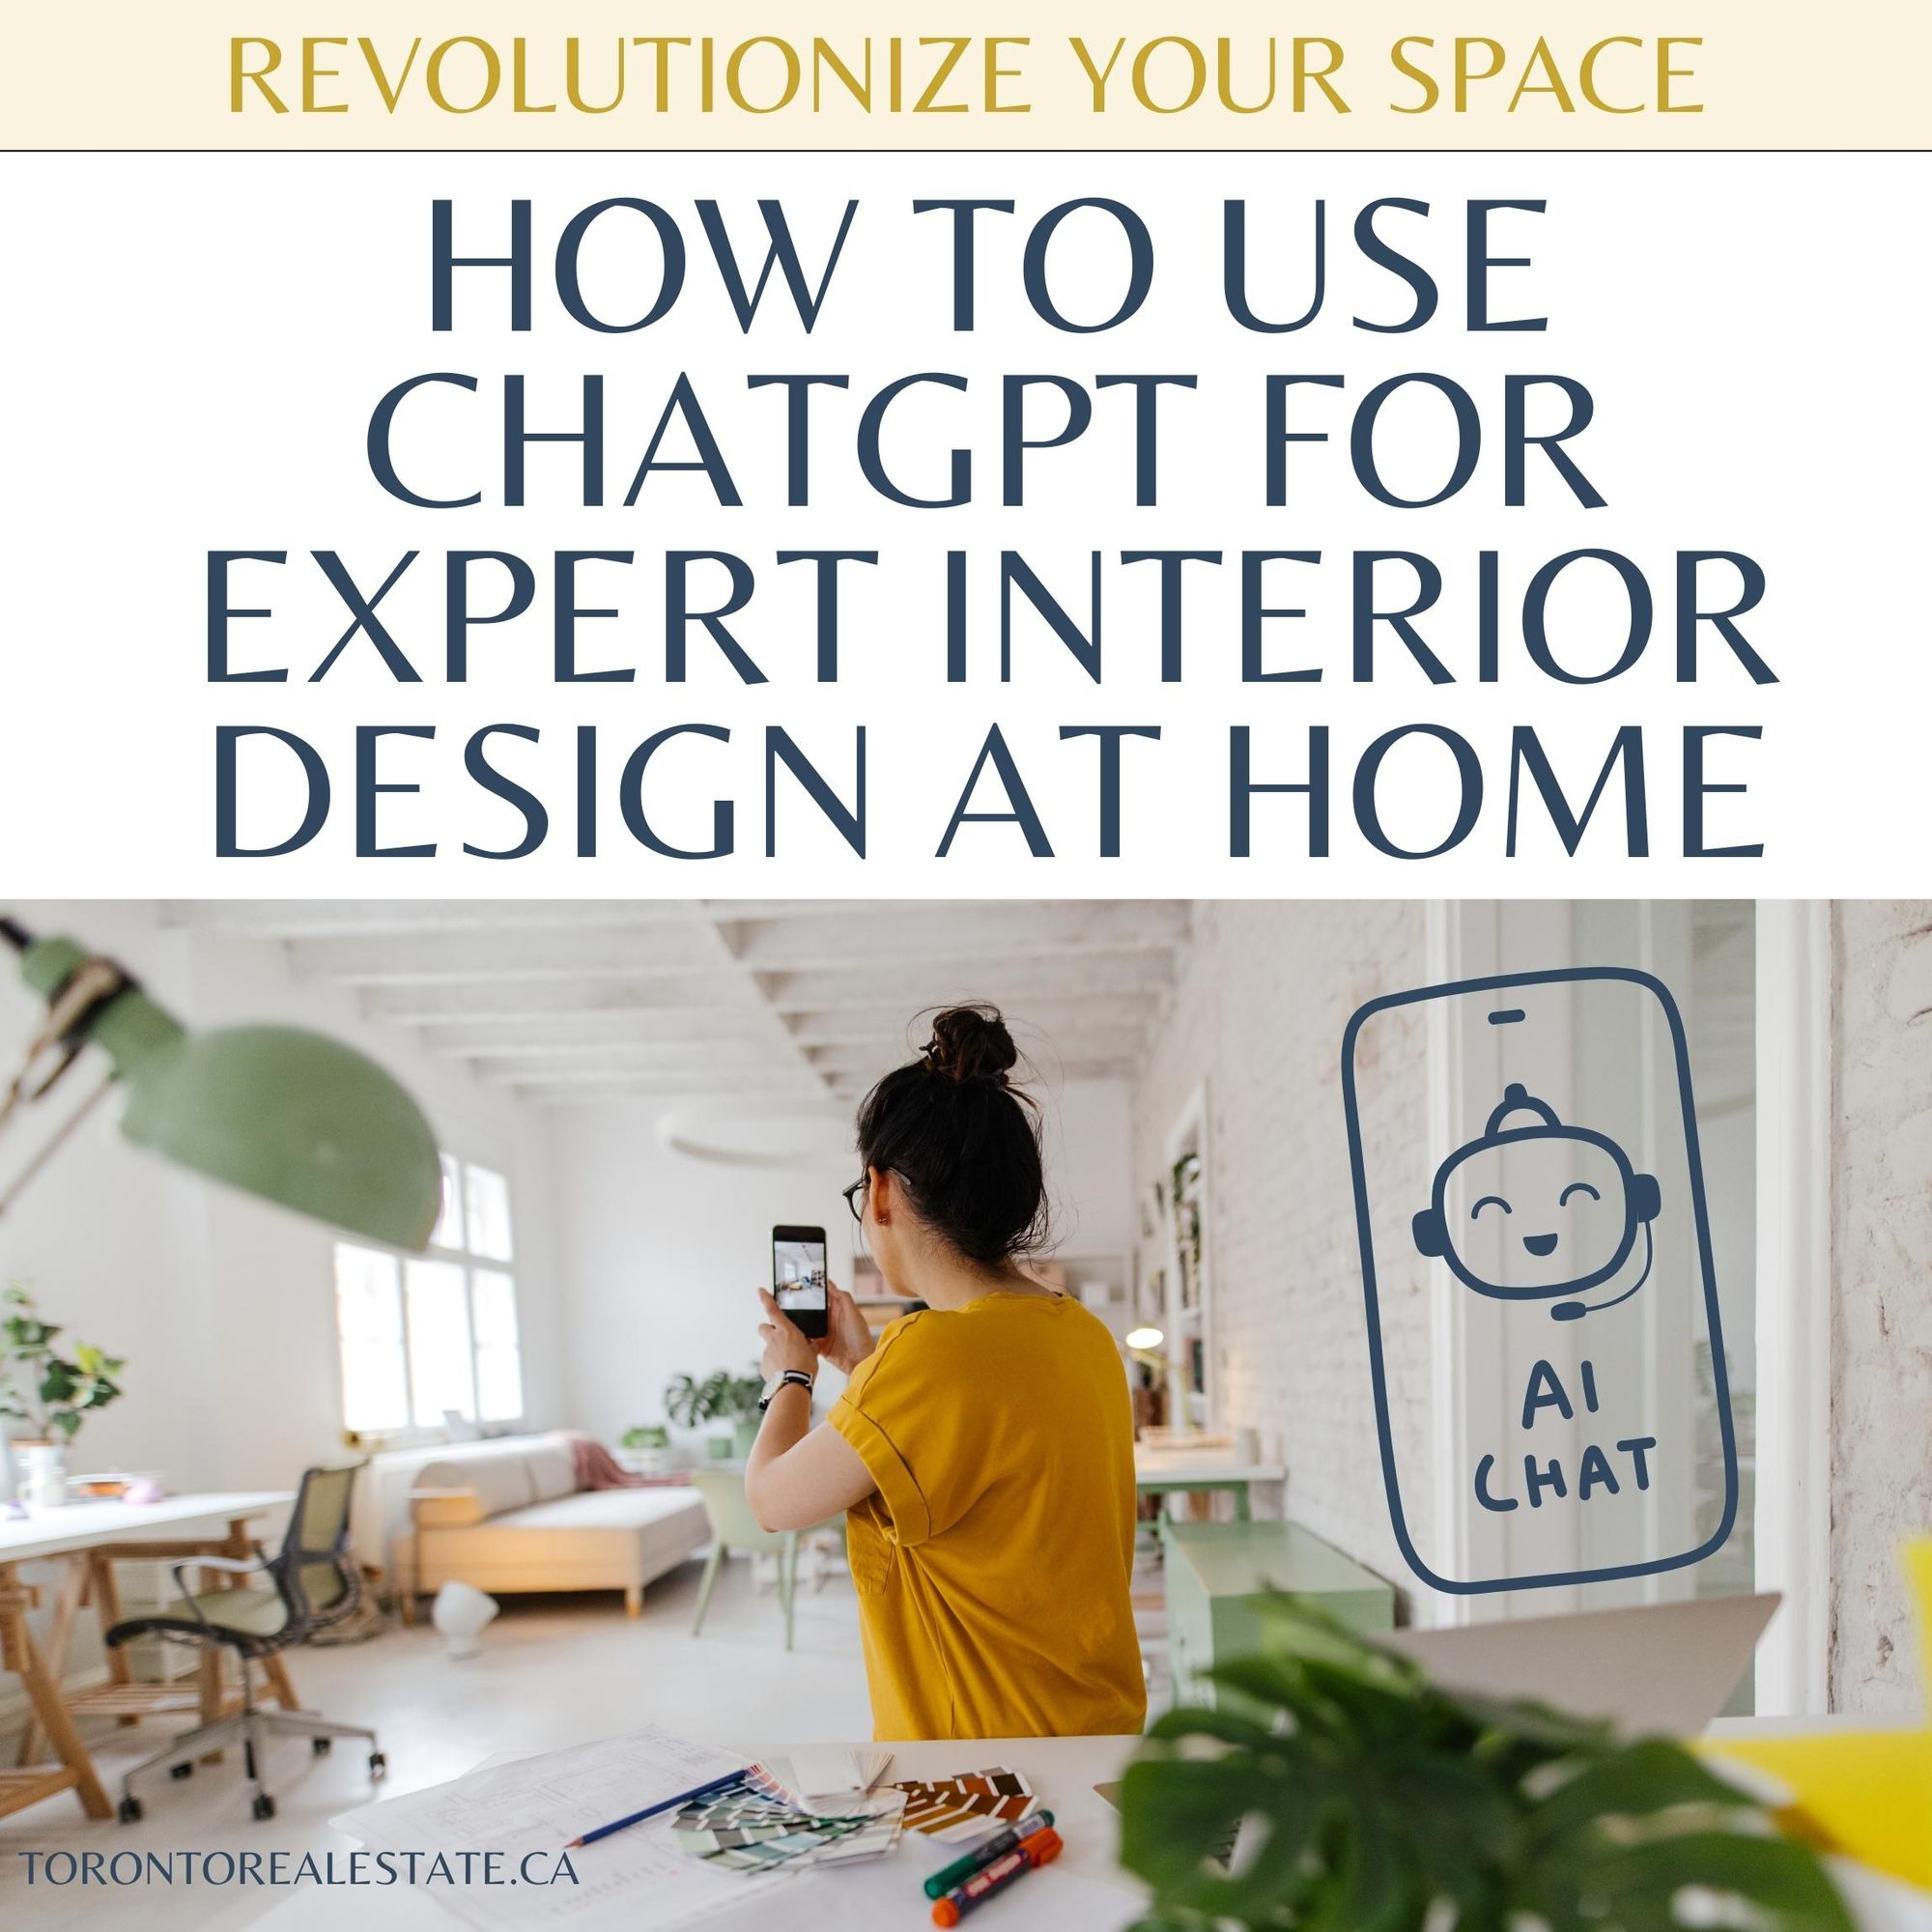 Revolutionize Your Space: How to Use ChatGPT for Expert Interior Design at Home